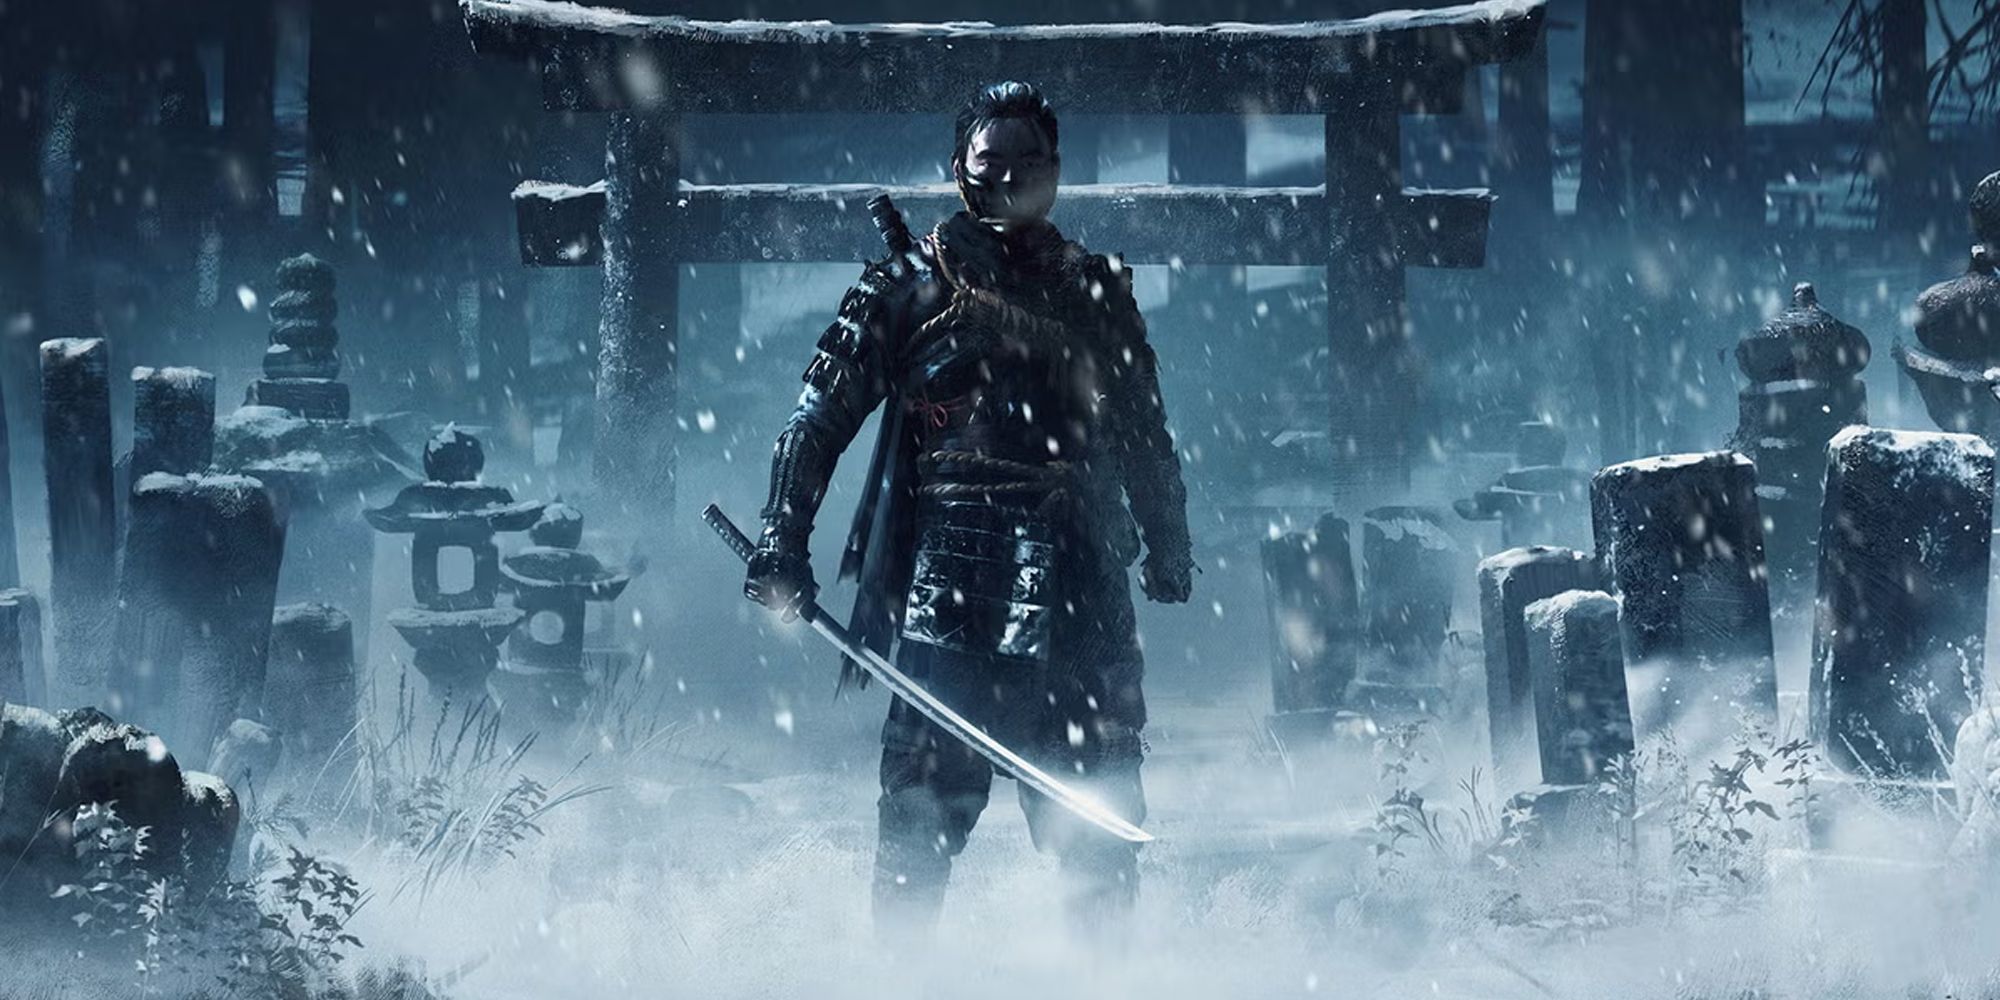 Ghost of Tsushima's Jin Sakai standing in the snow with his sword drawn